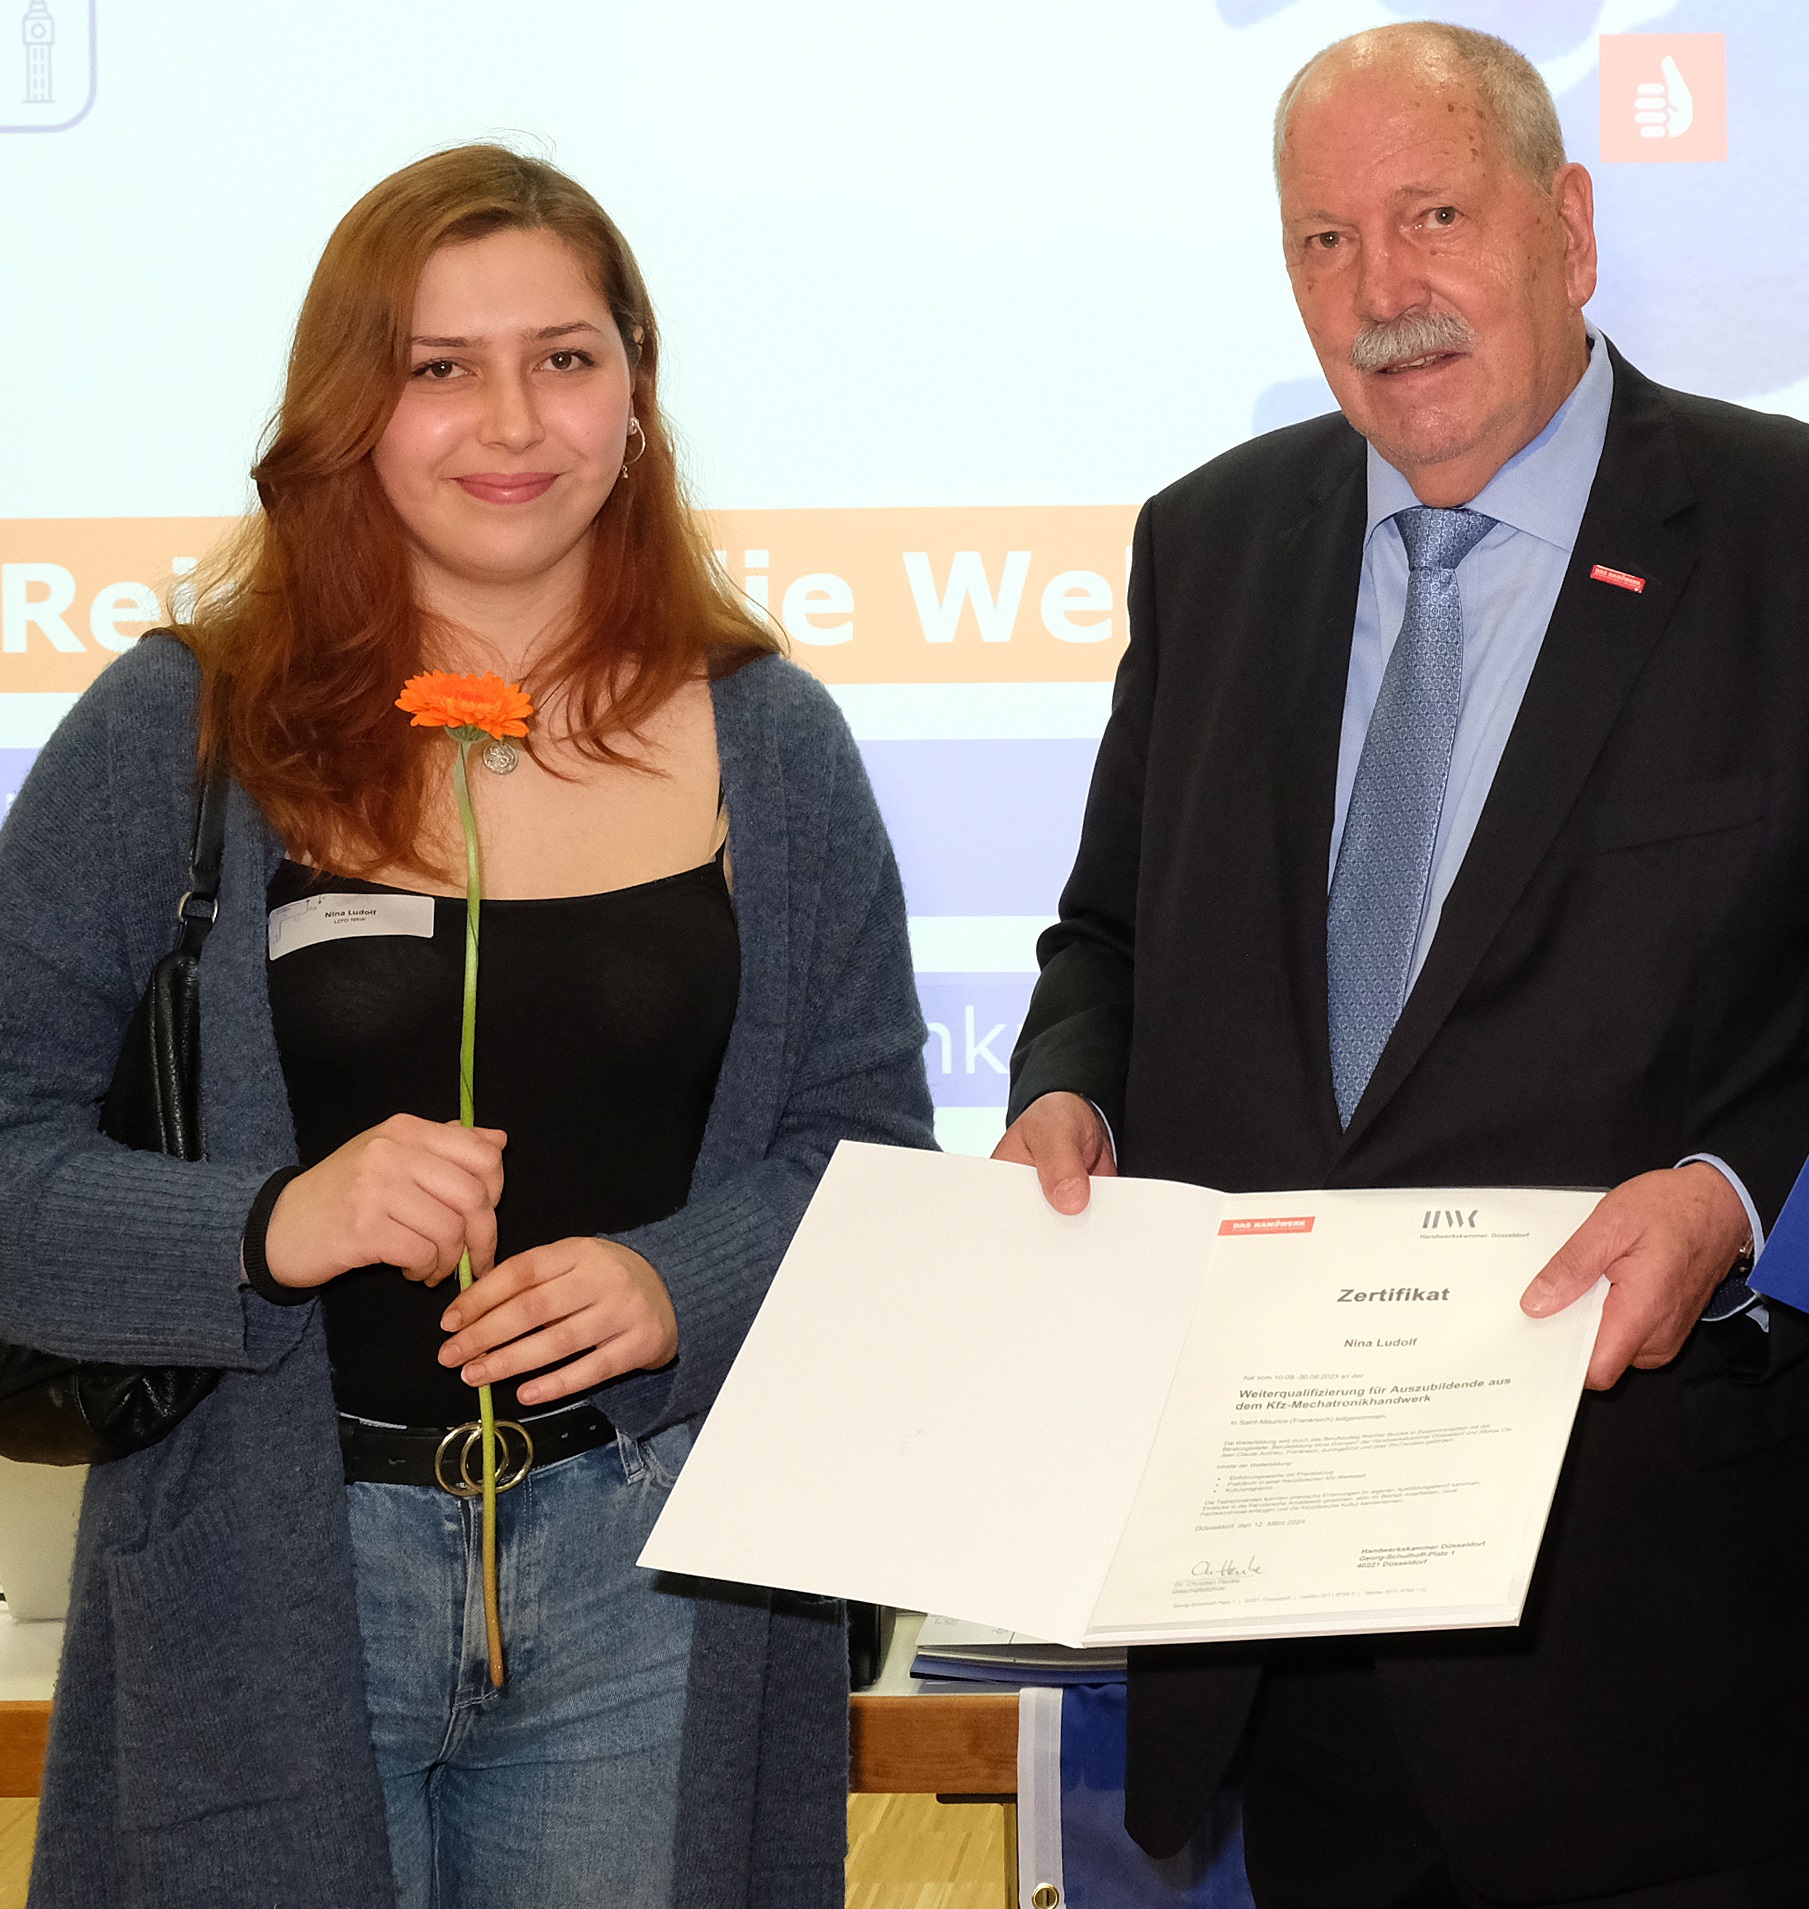 Nina Ludolf receives her certificate of participation